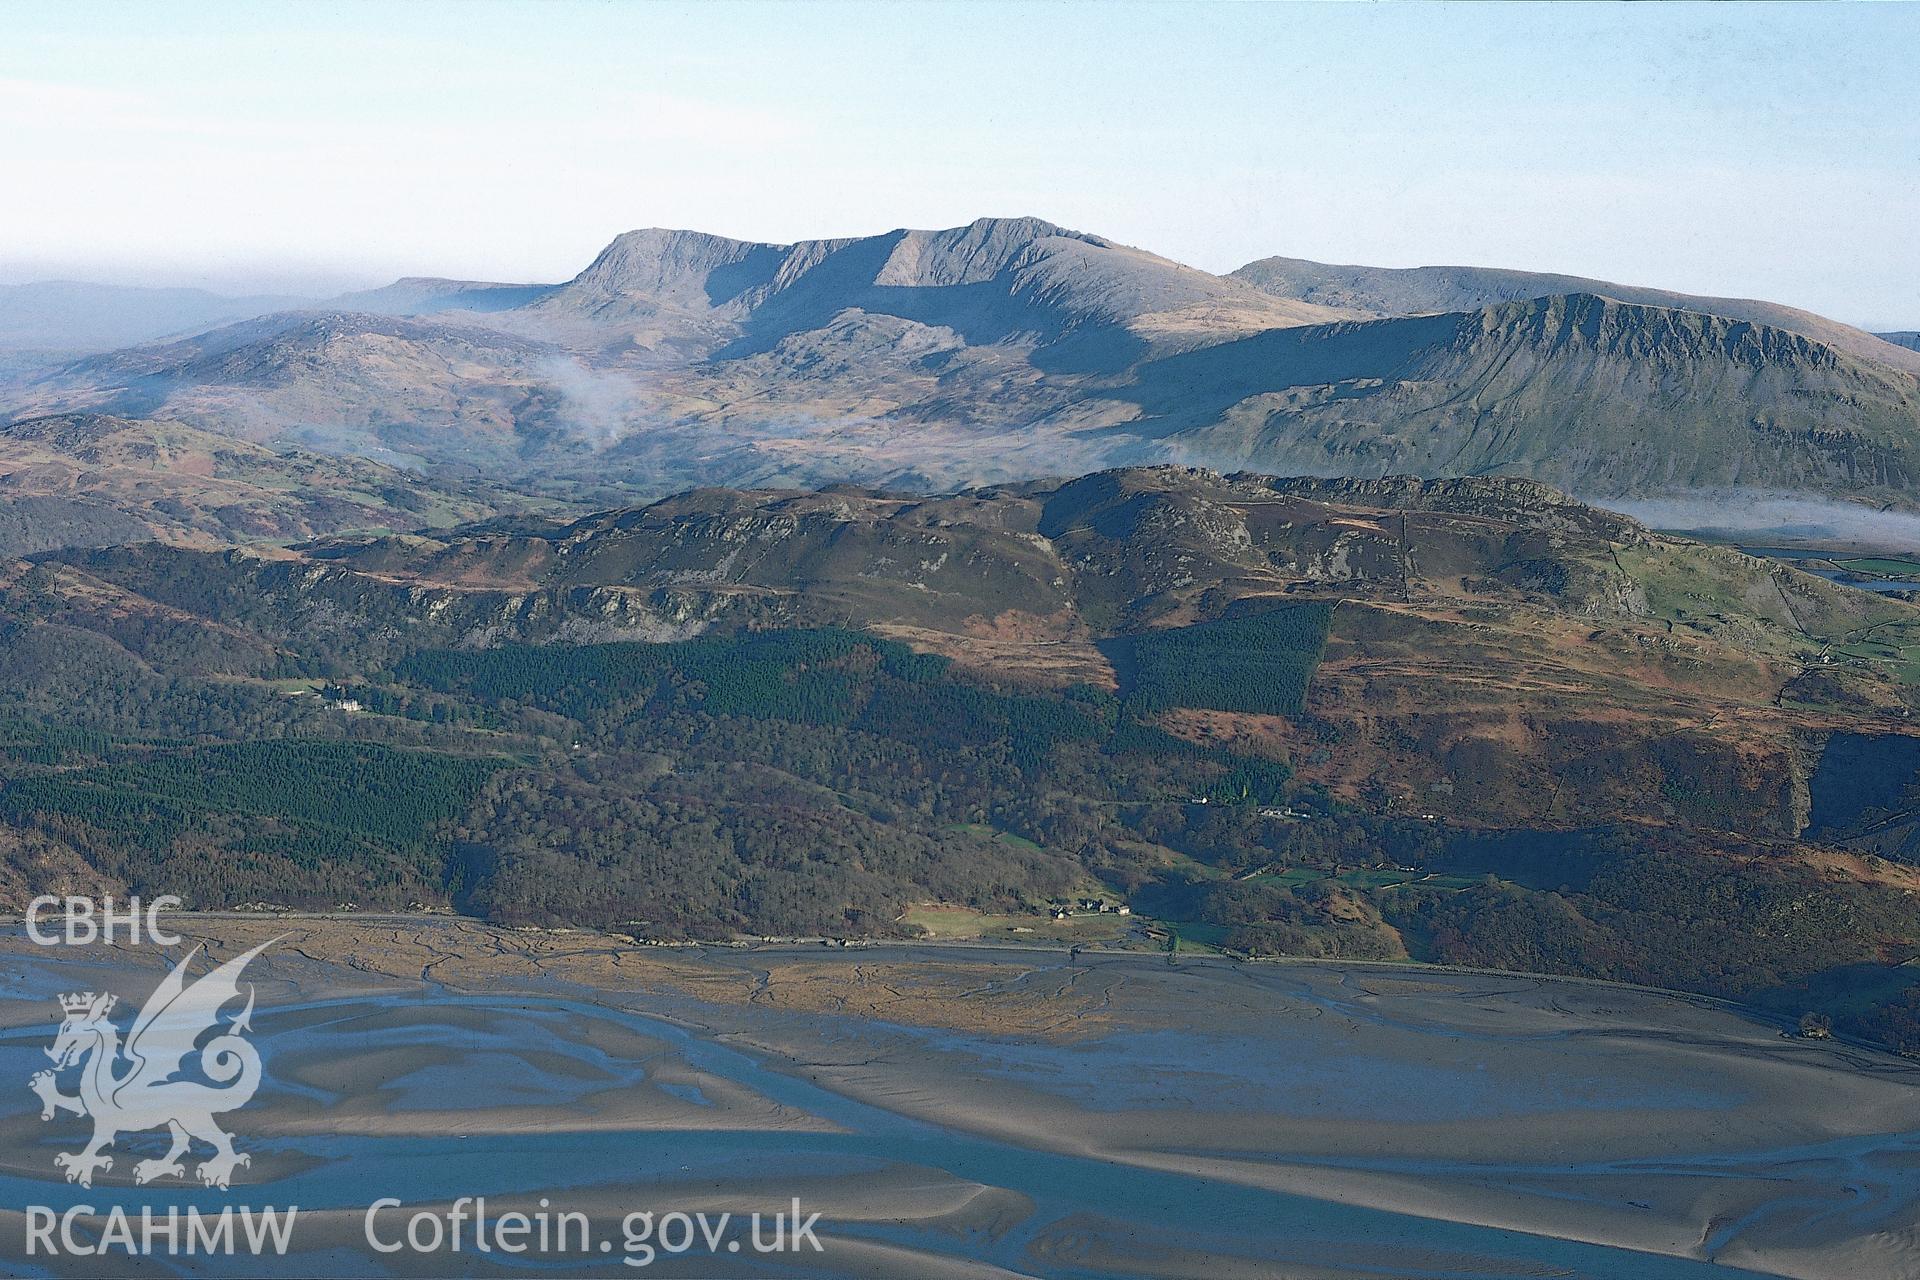 Slide of RCAHMW colour oblique aerial photograph of Cadair Idris And Mawddach, taken by T.G. Driver, 17/3/1999.